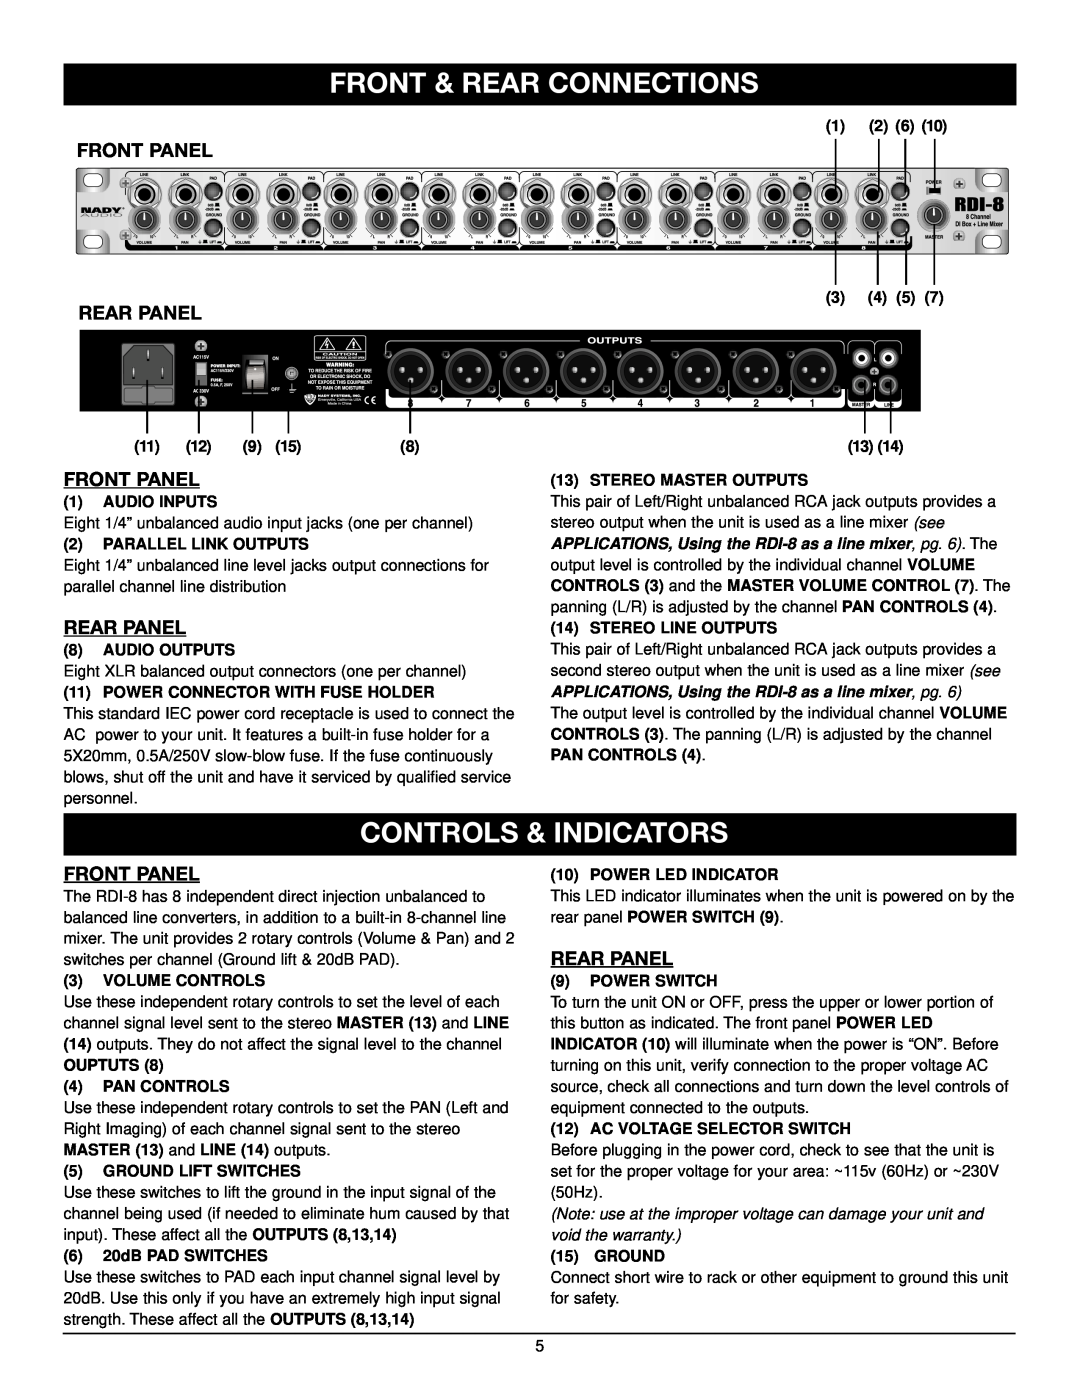 Nady Systems RDI-8 Front & Rear Connections, Controls & Indicators, Front Panel, Rear Panel, 1 2 6, 3 4 5, Audio Inputs 